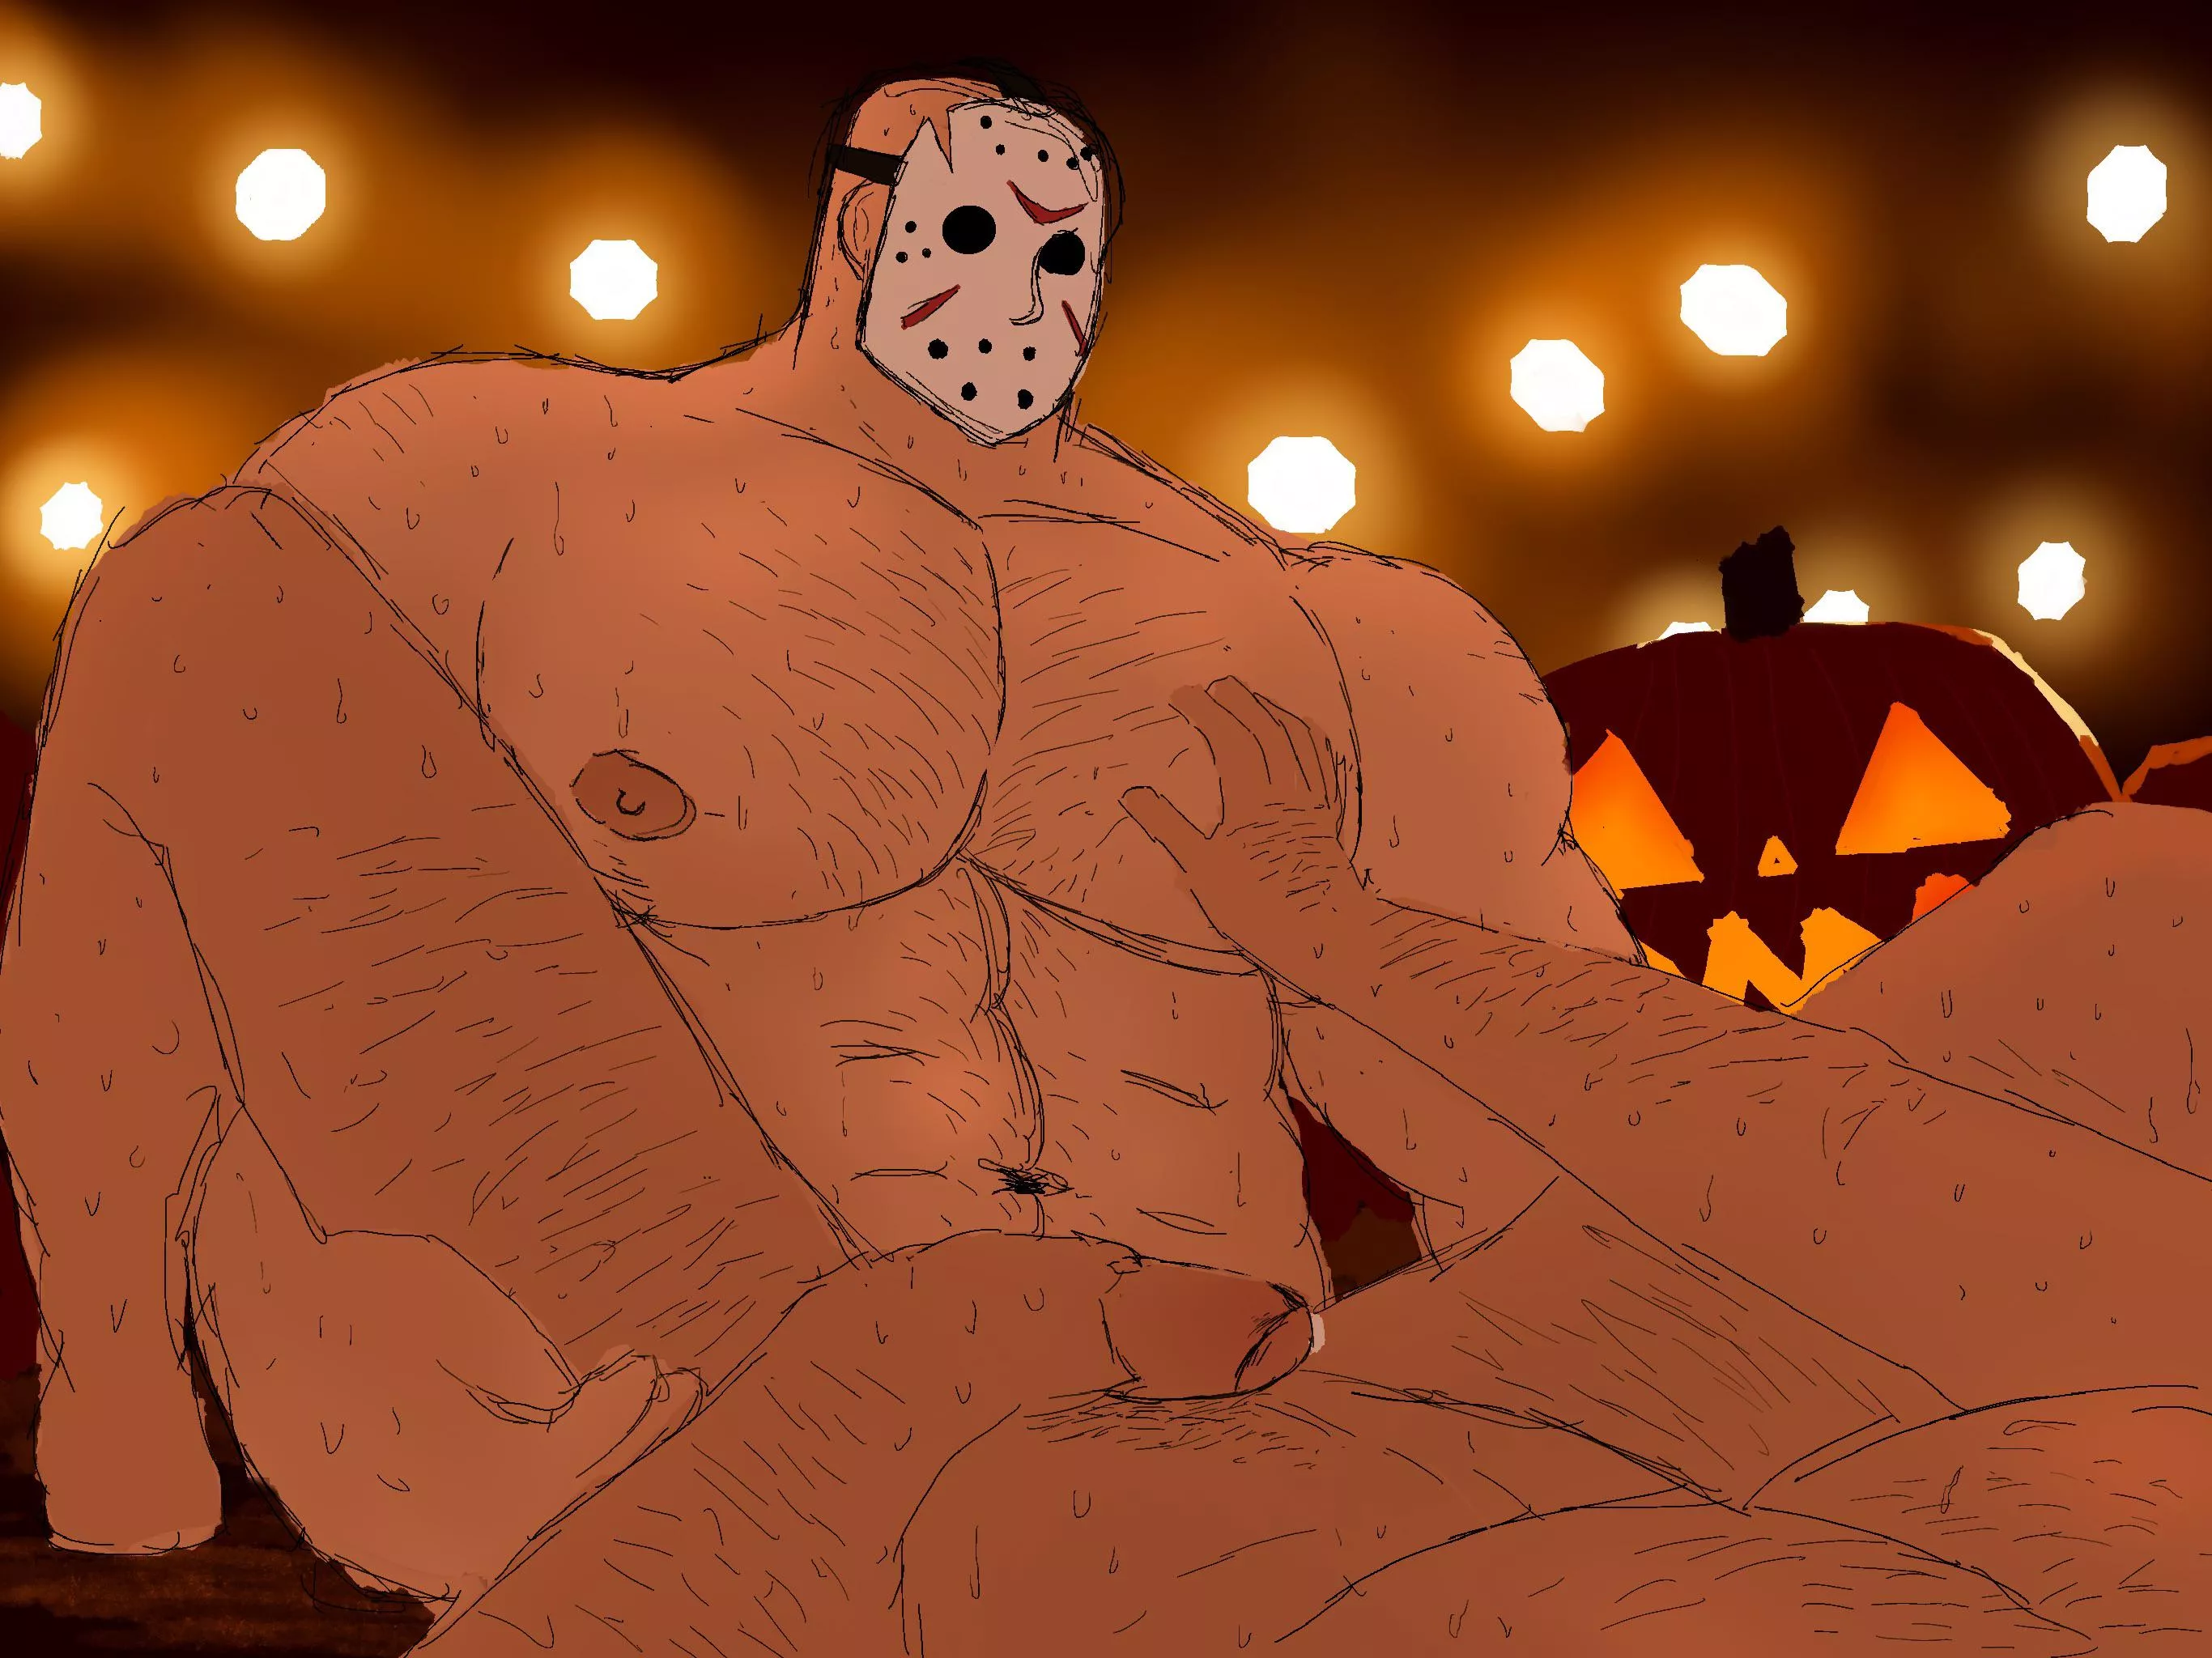 Jason Voorhees Made By Me Nudes Baramanga Nude Pics Org